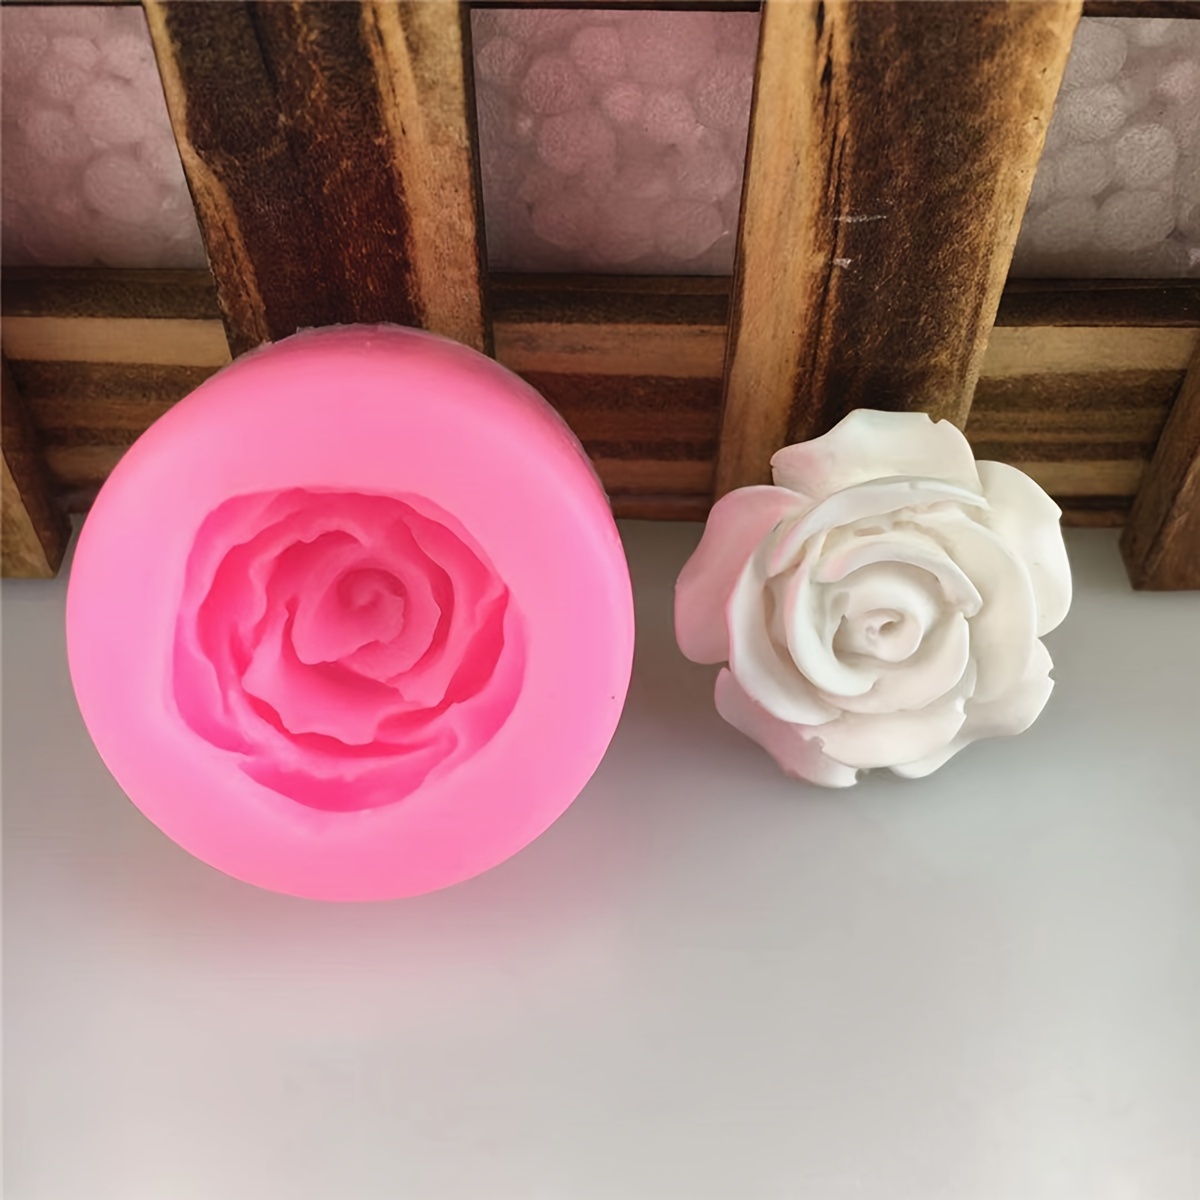 Kainuan Creative 3D Rose Mold Silicone Soap Mold Rose Soft Candy DIY  Handmade Cake Decoration Candy Craft Mold Silicone Mold Tool 